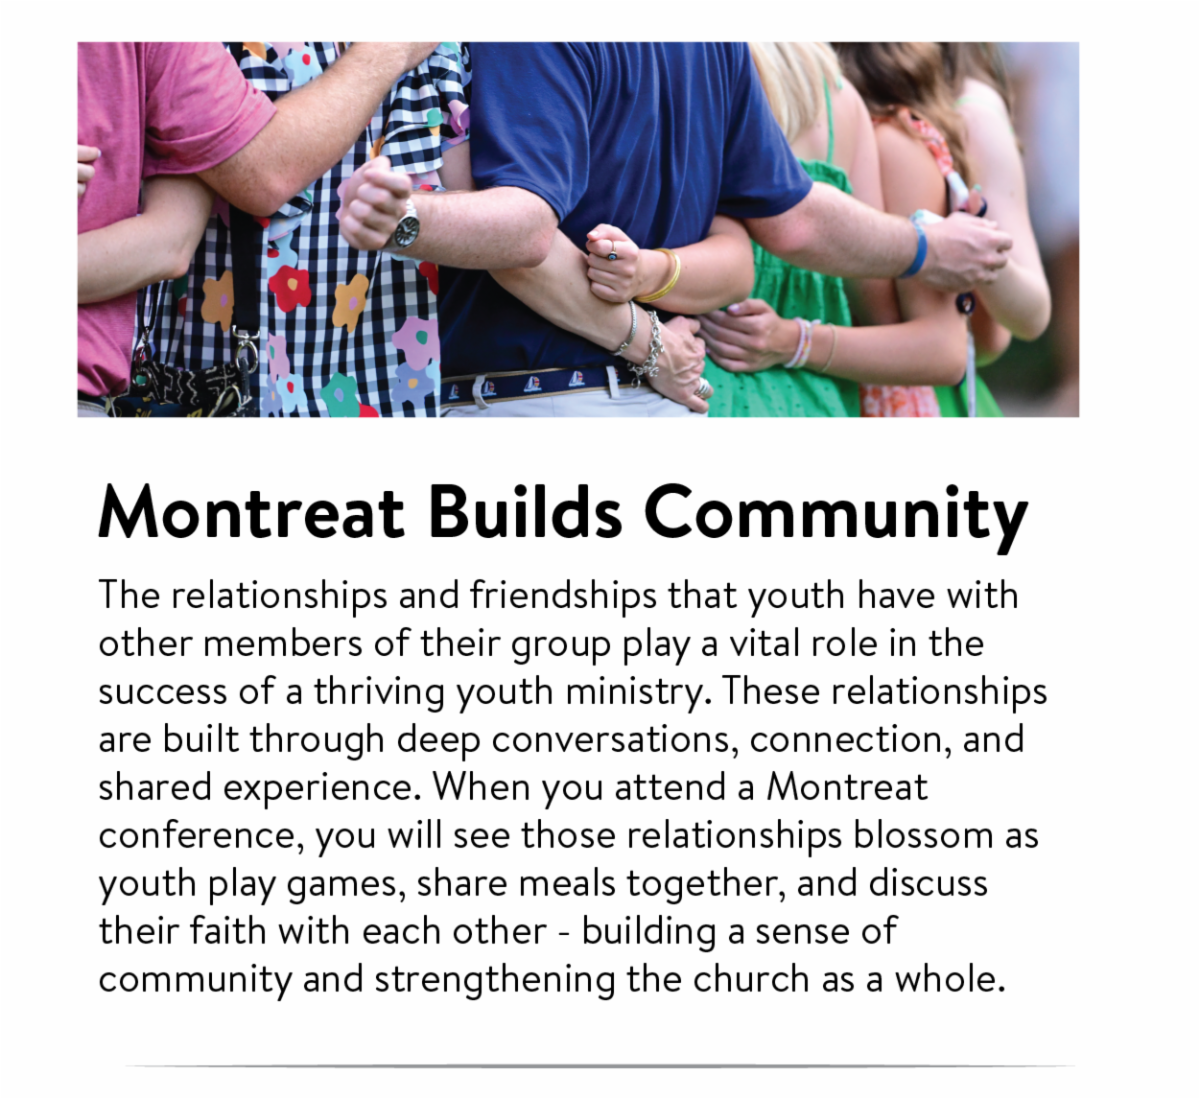 Montreat builds community:  The relationships and friendships that youth have with other members of their group play a vital role in the success of a thriving youth ministry. These relationships are built through deep conversations, connection, and shared experience. When you attend a Montreat conference, you will see those relationships blossom as youth play games, share meals together, and discuss their faith with each other - building a sense of community and strengthening the church as a whole.